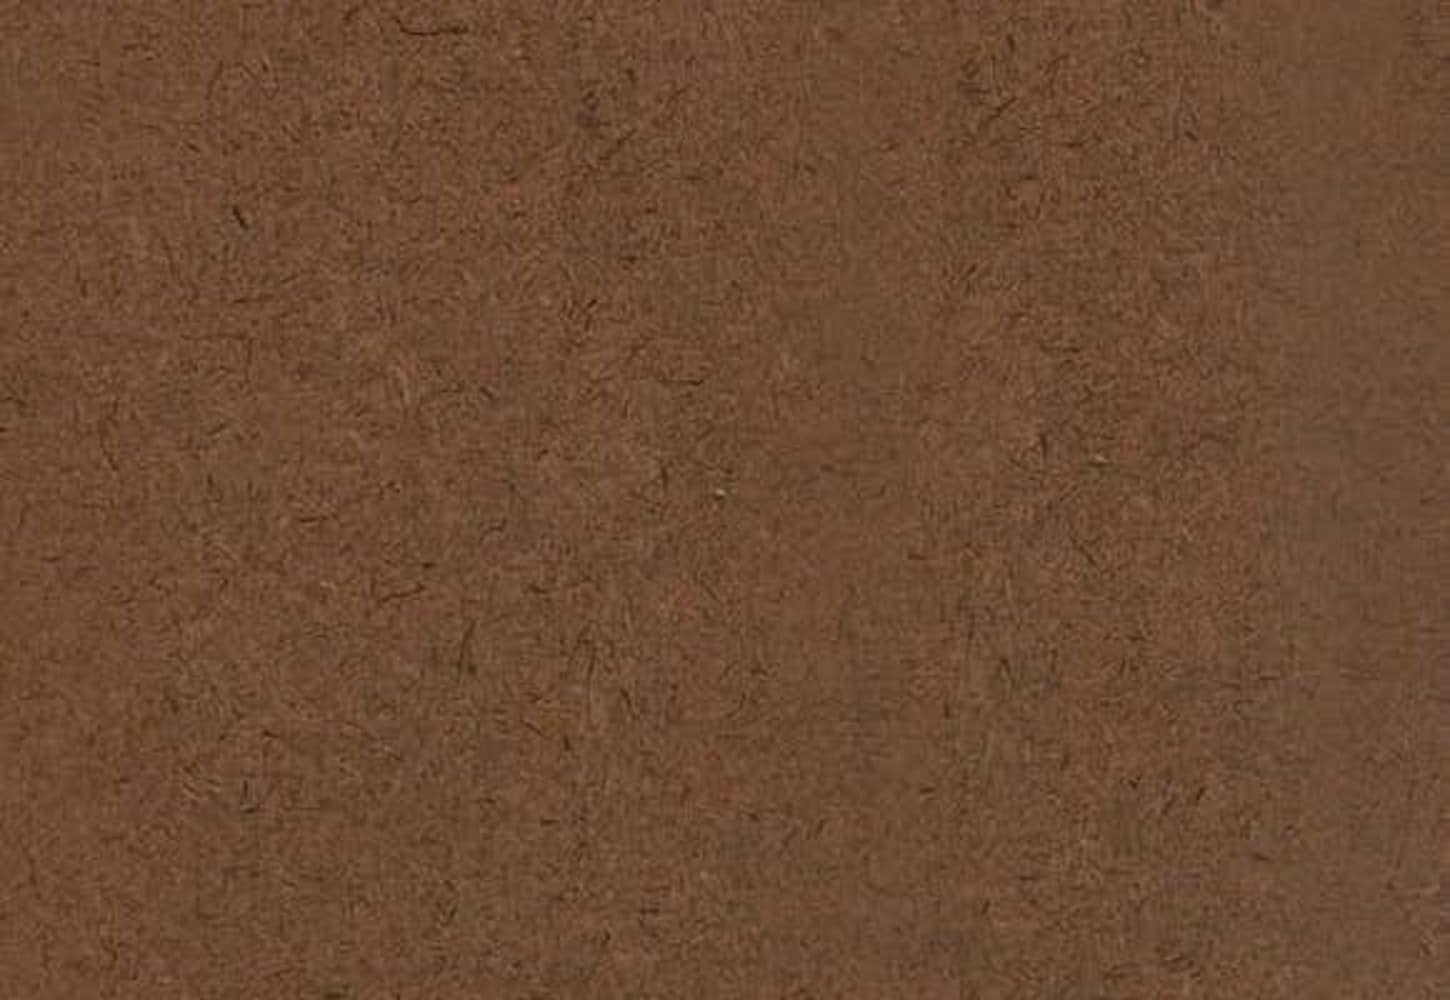 48-in x 96-in Smooth Brown Hardboard Circles Wall Panel in the